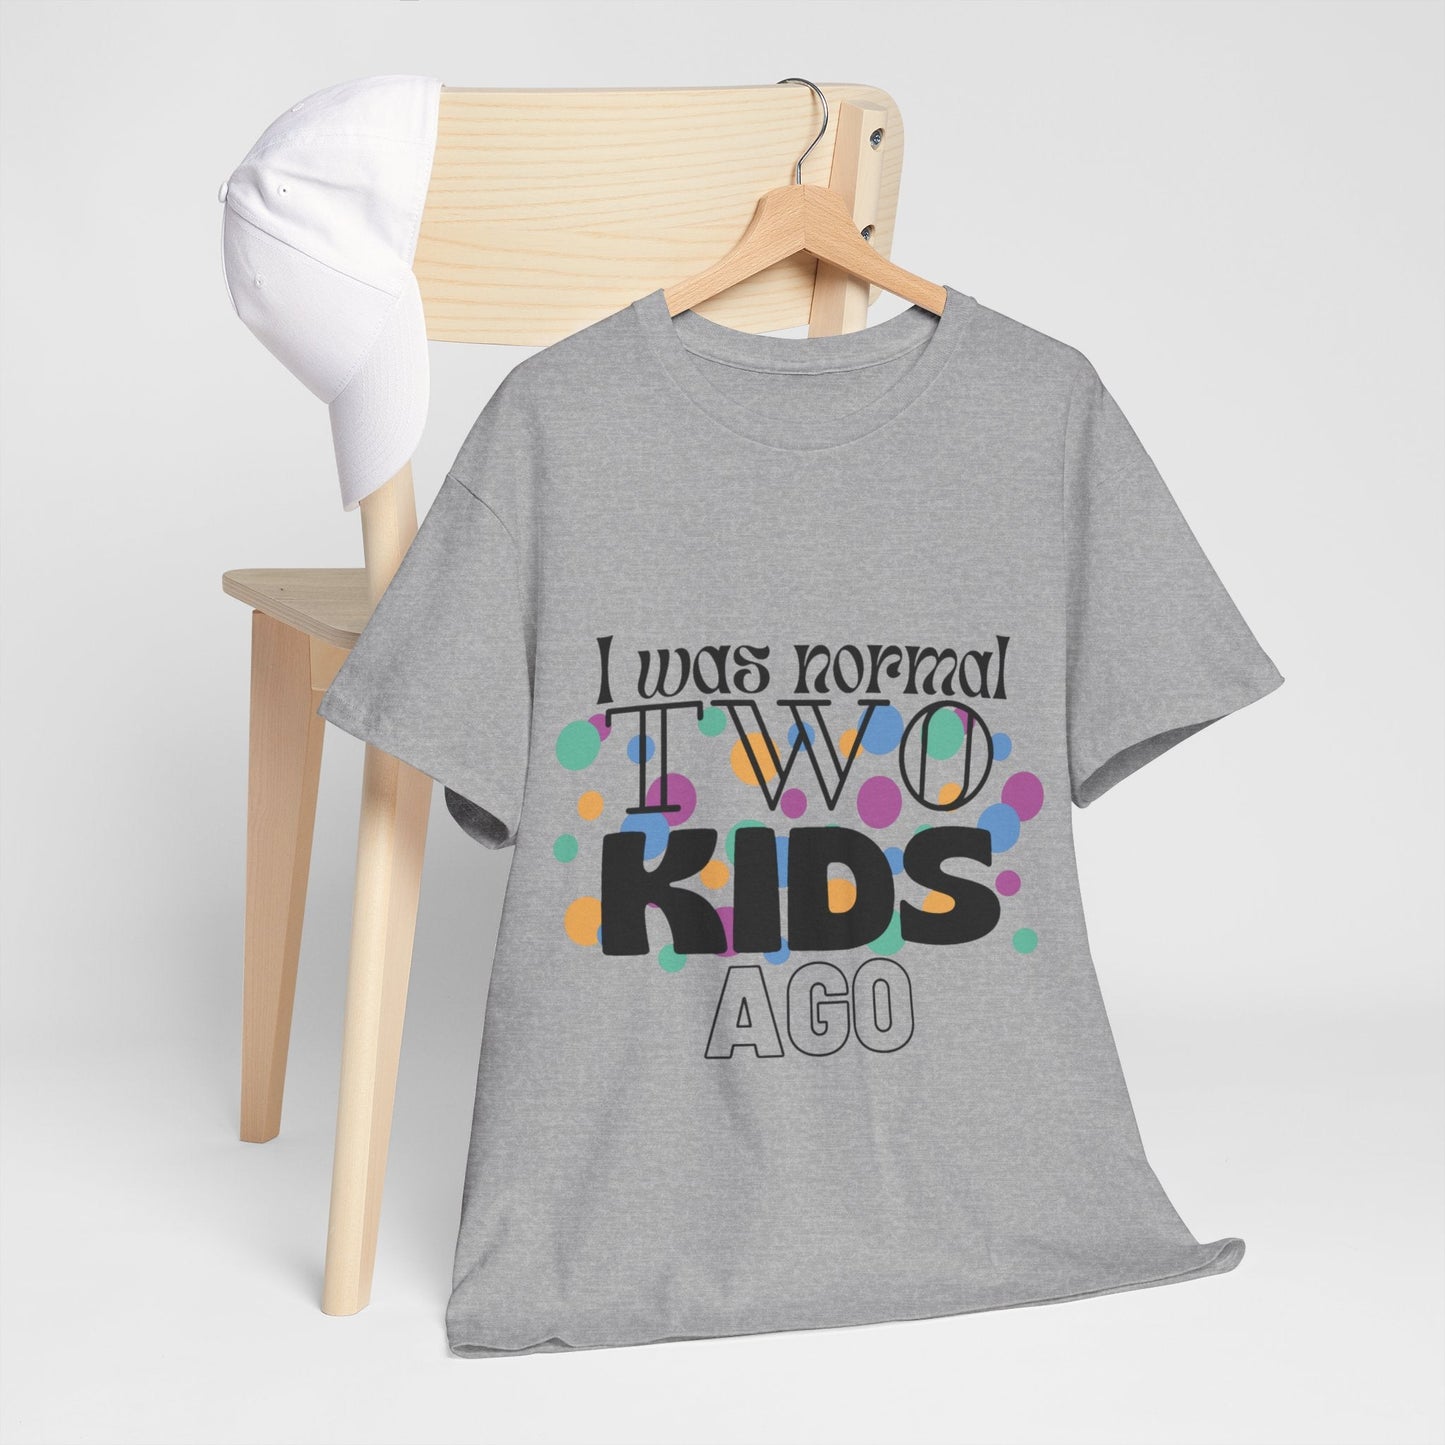 I was normal two kids ago - Custom t - Shirts - For mom - S to 3XL - Alex's Store - Sport Grey - 